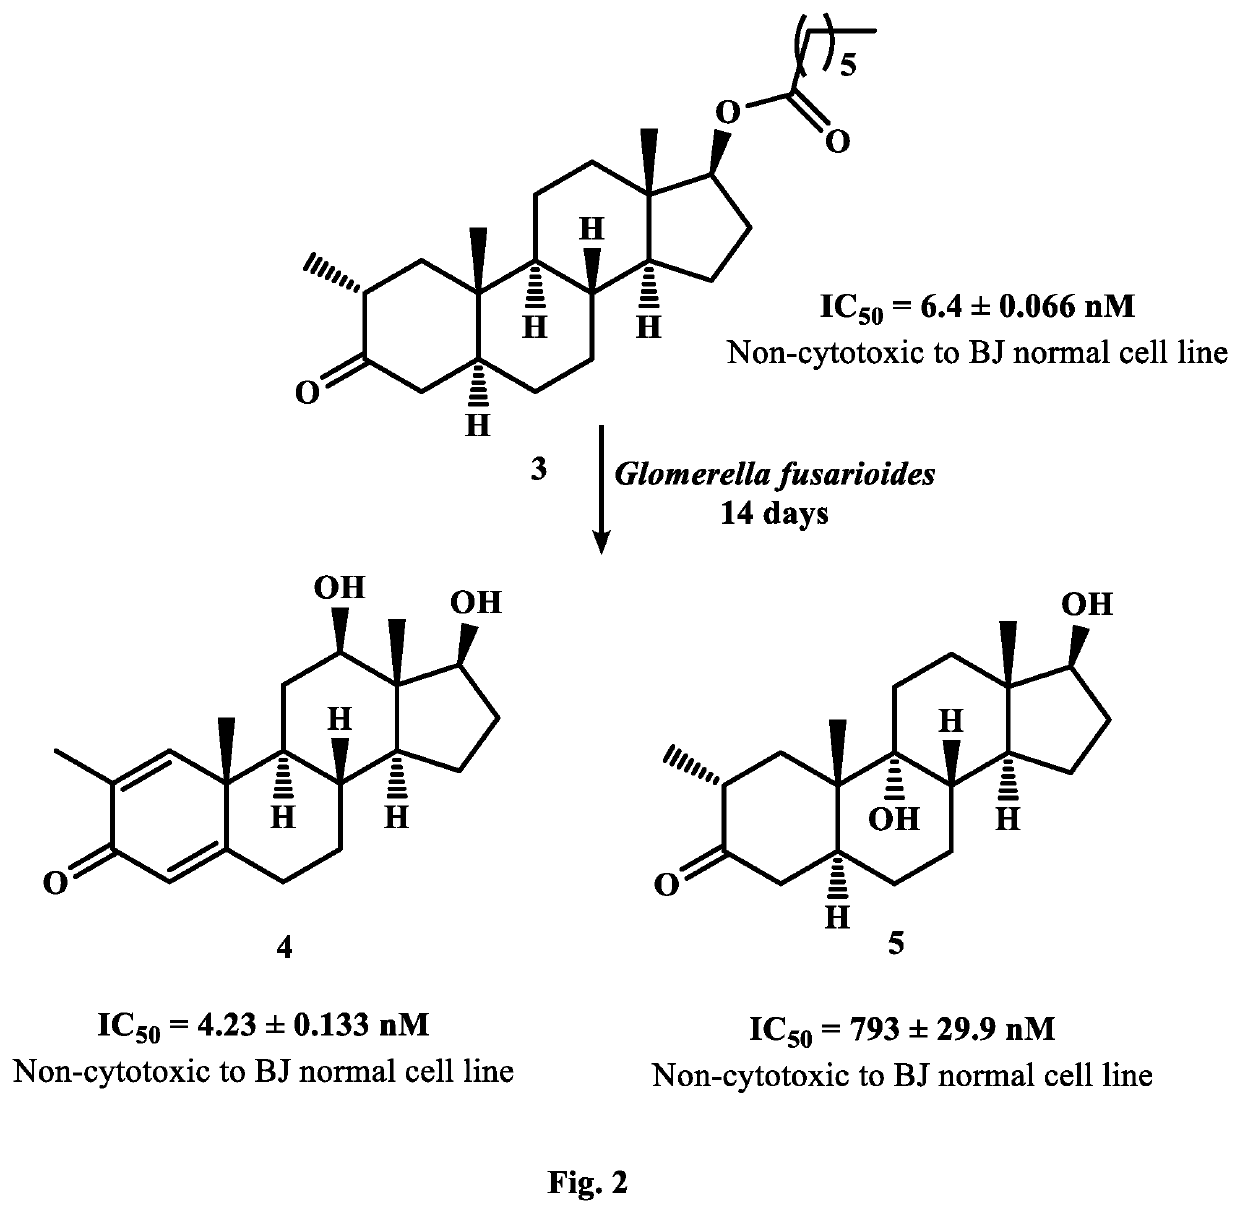 Synthesis of New Potent Aromatase Inhibitors Through Biocatalysis of Anti-Cancer Drugs, Atamestane, Drostanolone Enanthate, and Exemestane